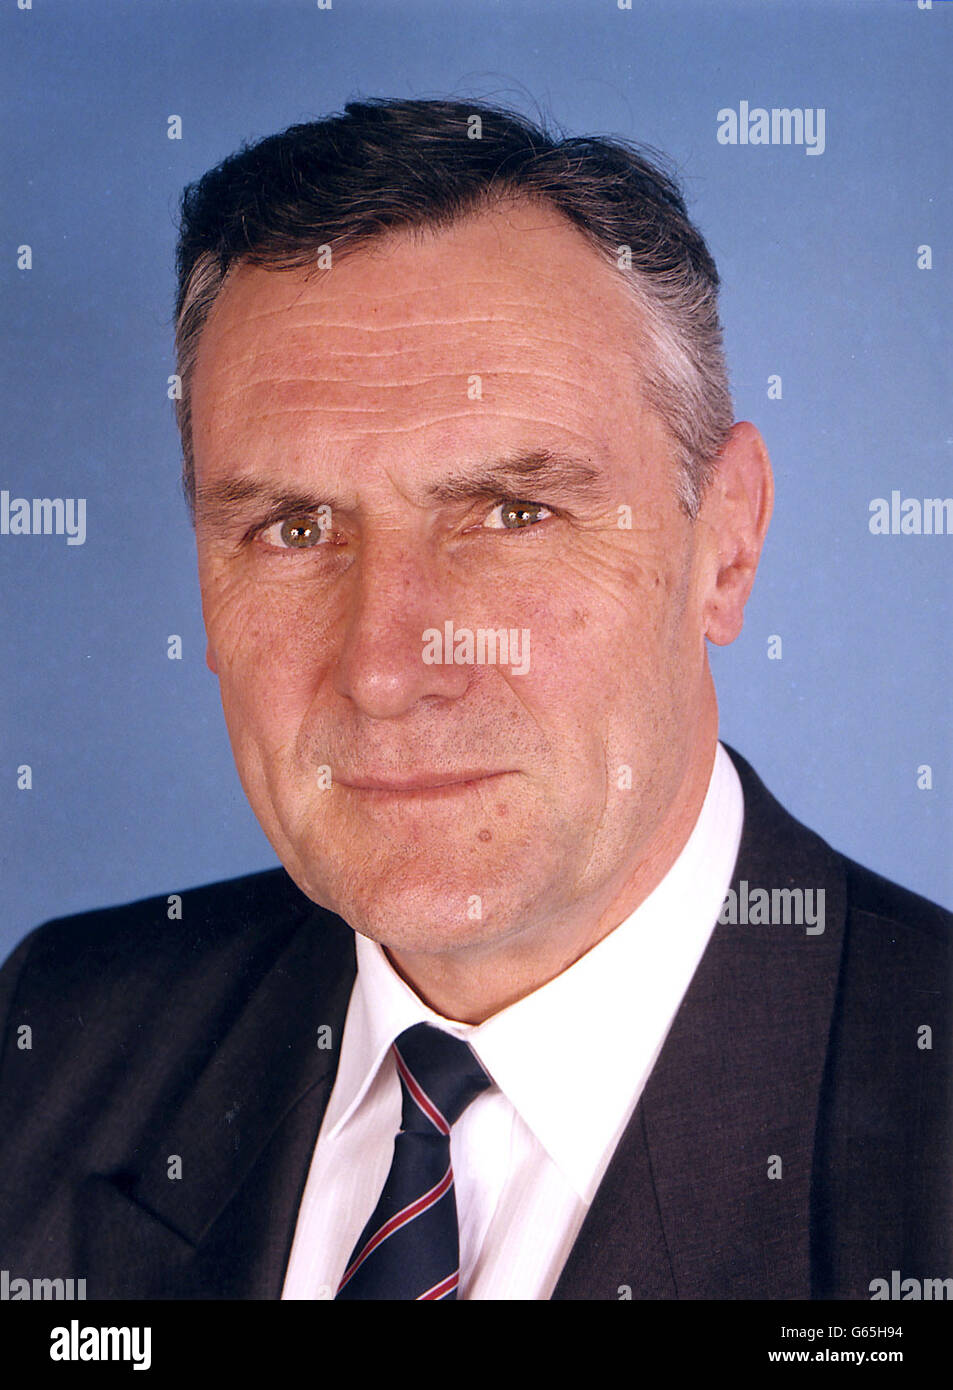 Robin Oake, the father of Stephen Oake, 40, the Manchester police Special Branch Detective Constable who was stabbed, during a raid linked to the discovery in London of the deadly poison ricin. * Robin Oake was chief constable of the Isle of Man police force and a former assistant chief constable of Greater Manchester Police, and his son is thought to be the first policeman killed in an anti-terrorist operation for more than 10 years. Stock Photo